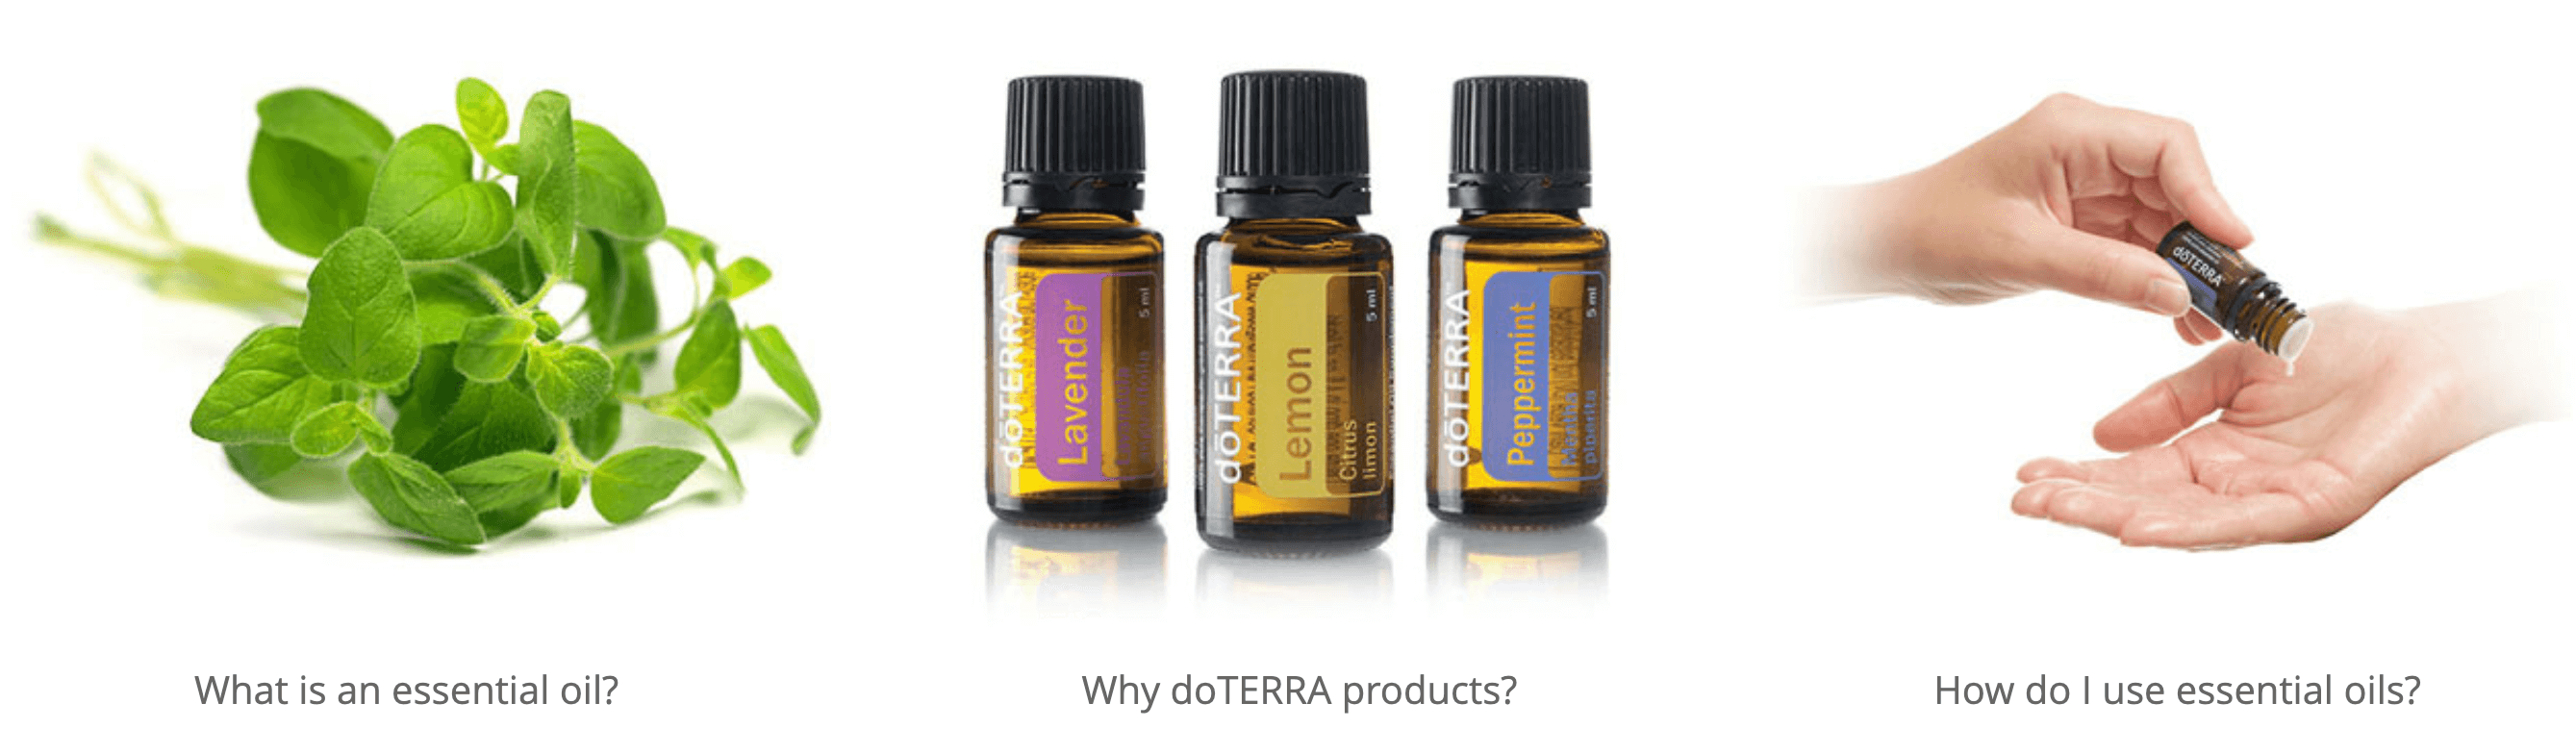 doterra-products